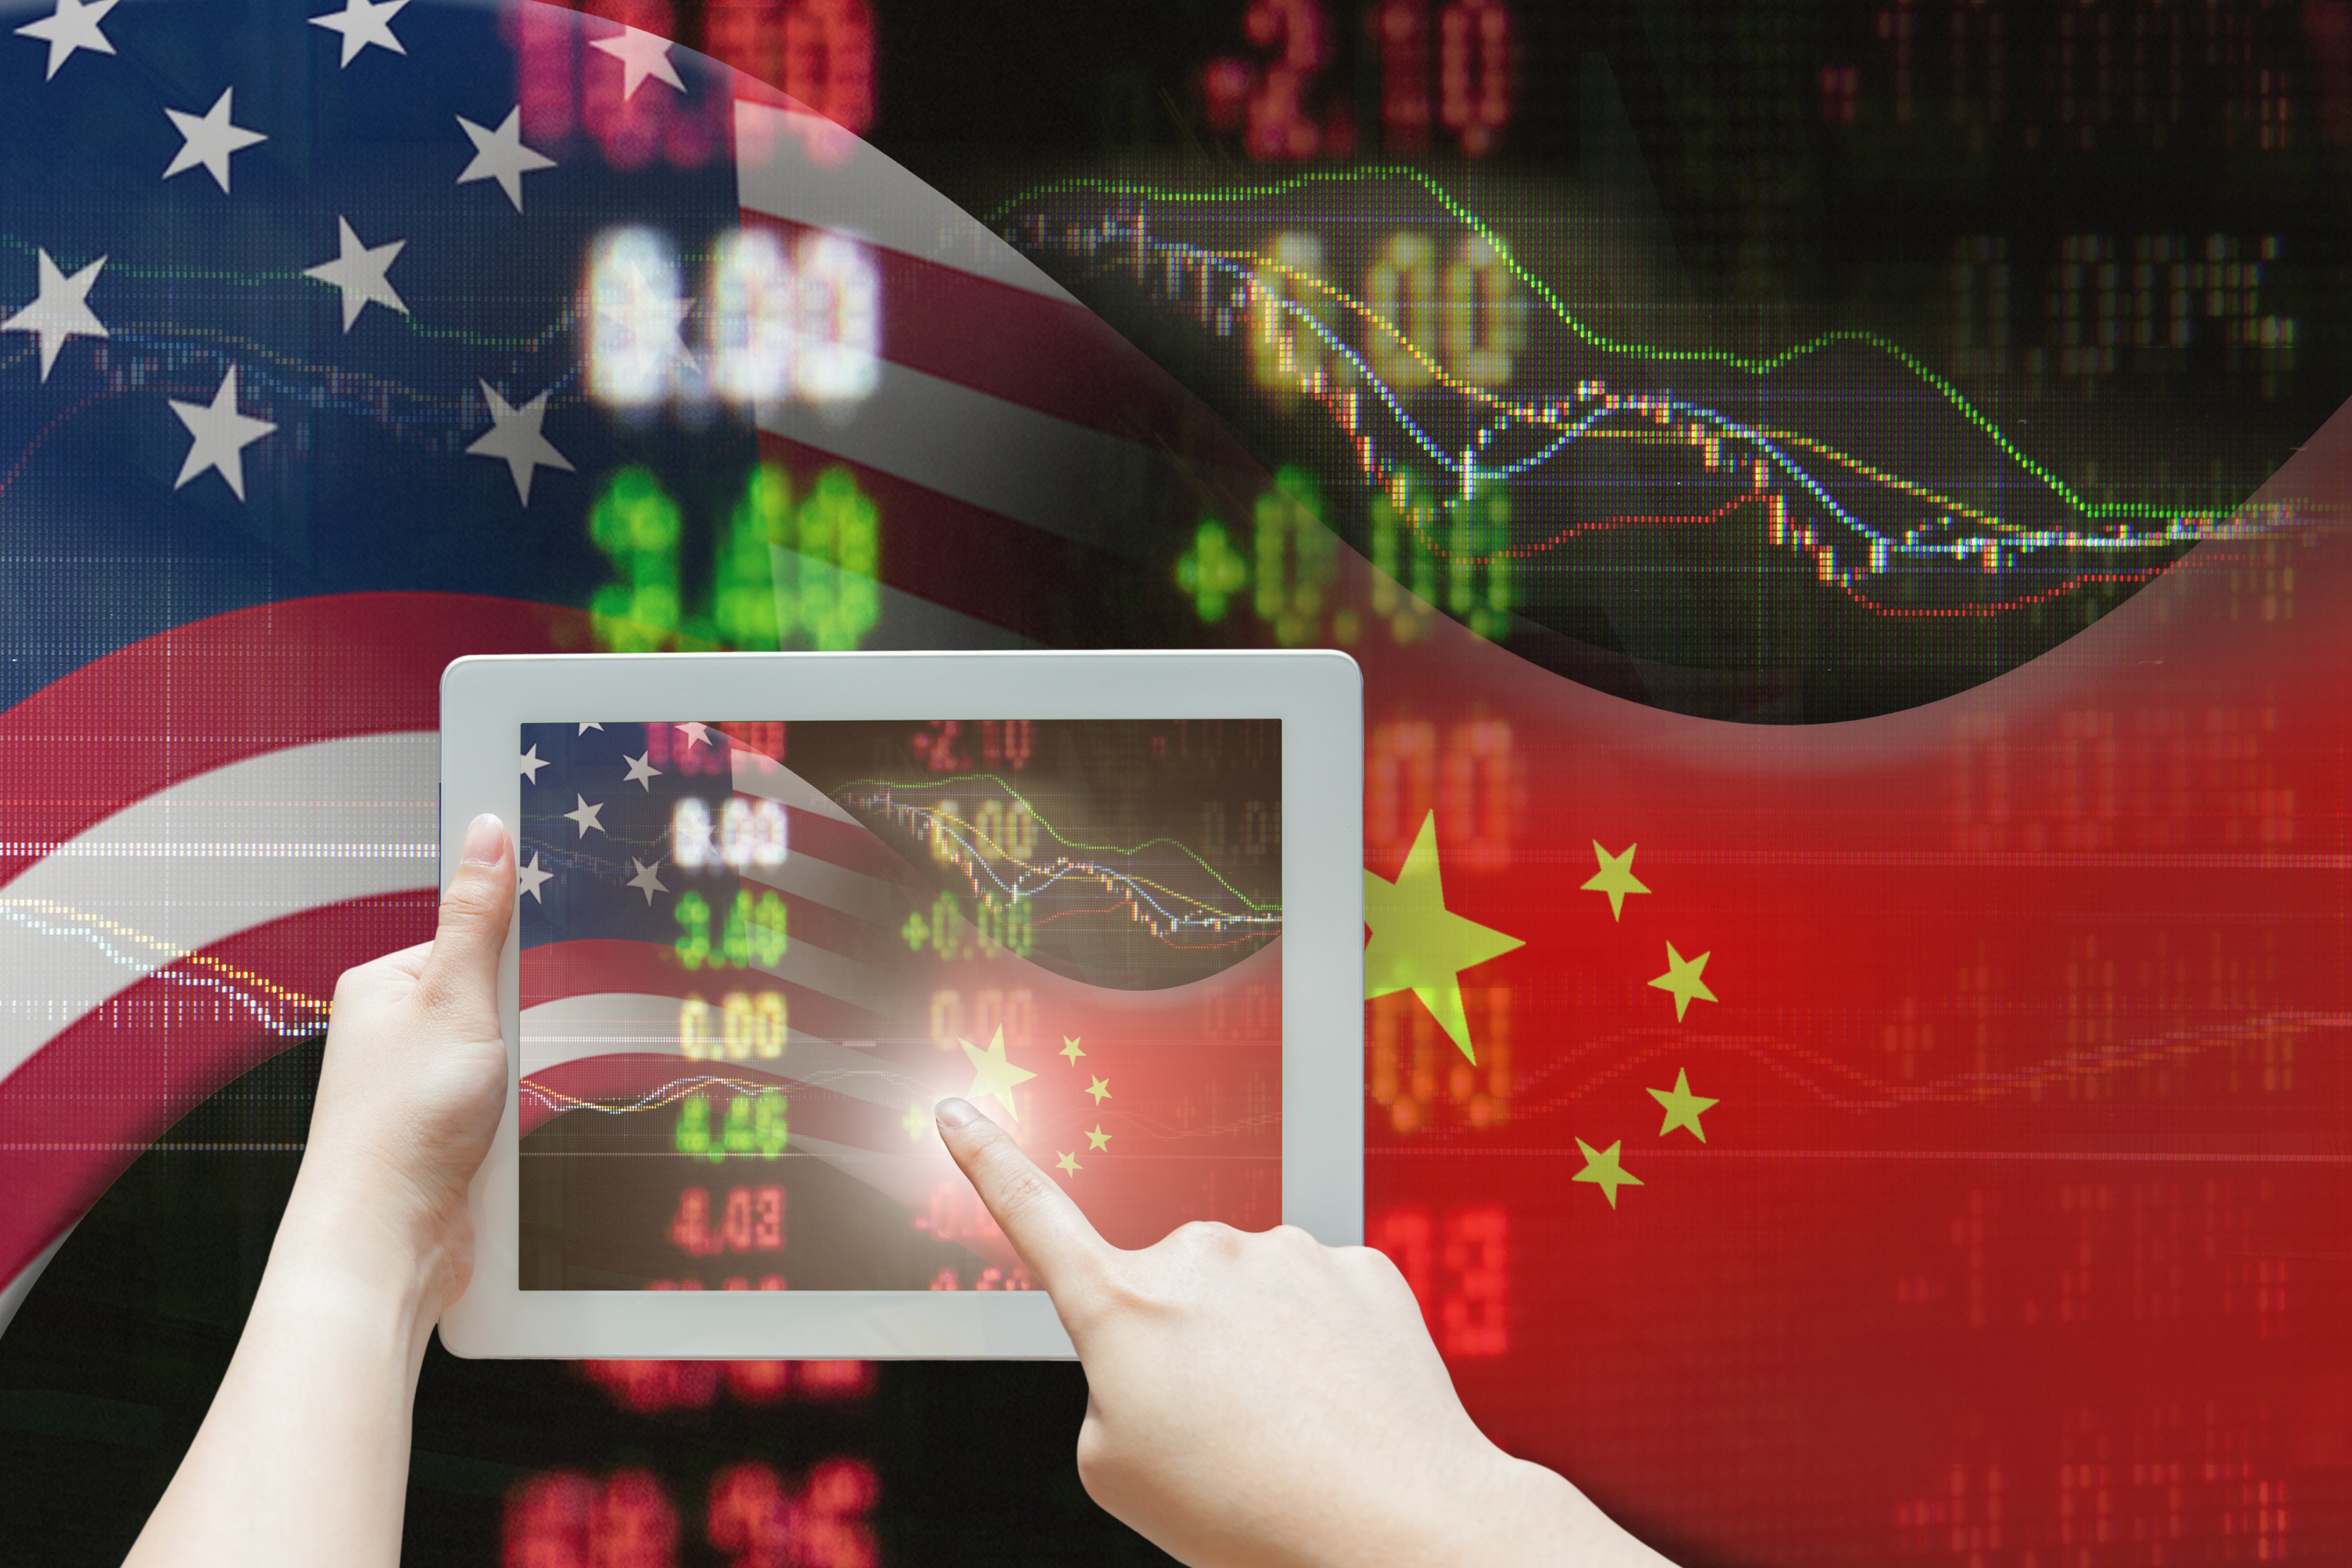 The accuracy of China’s economic data has long been questioned, as many feel there is a gap between reality on the ground and the official figures. Photo: Shutterstock